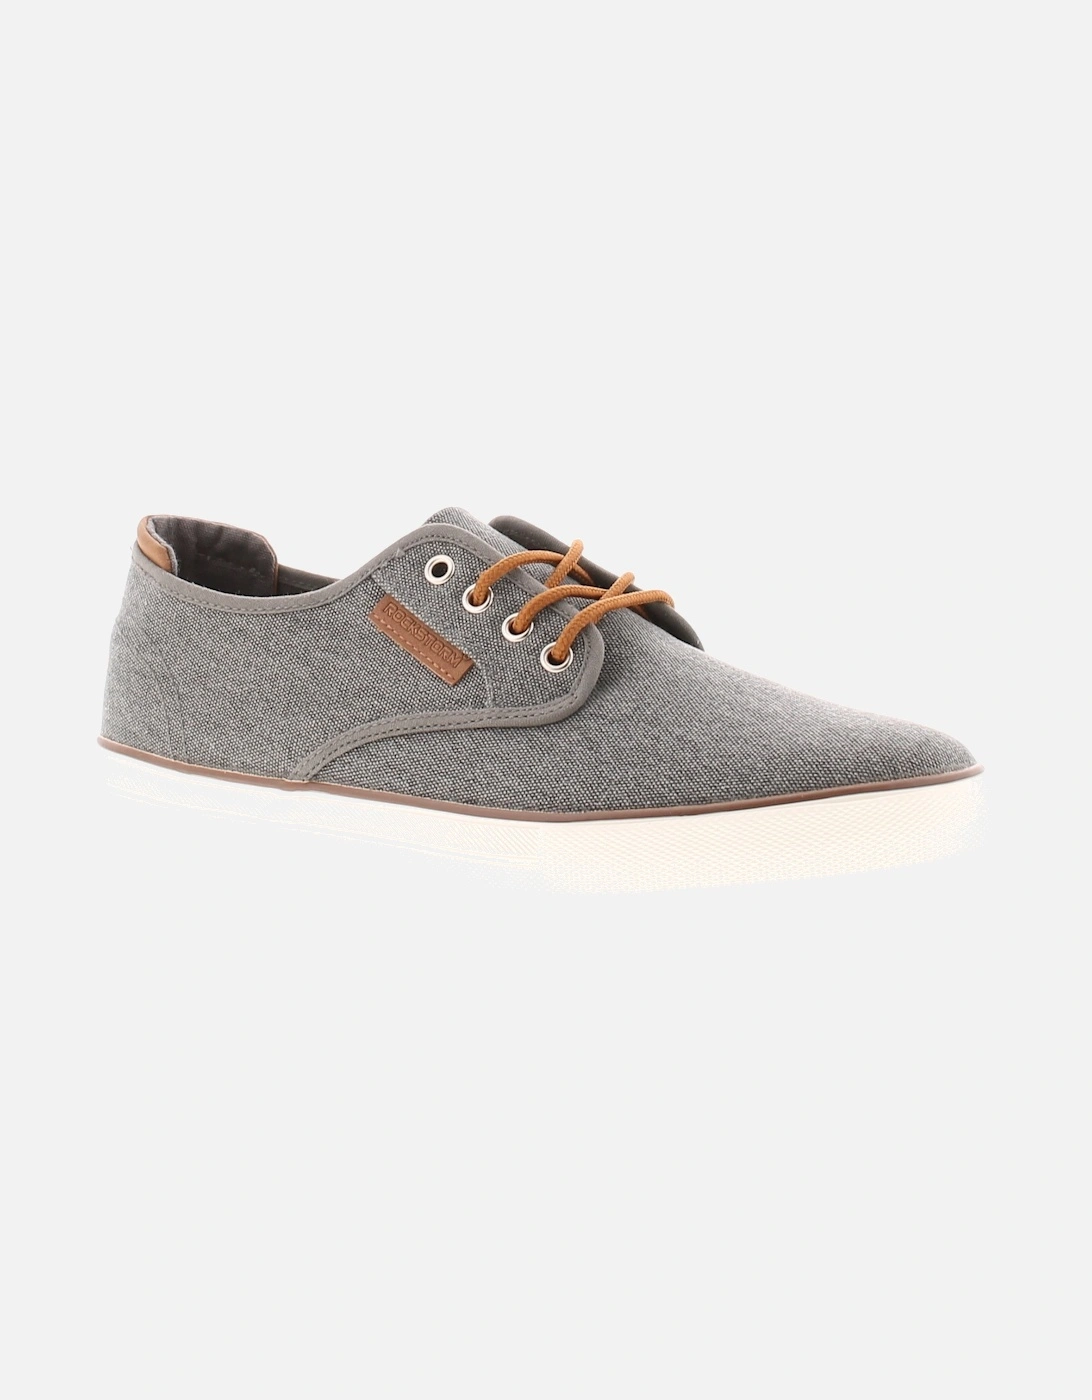 Mens Canvas Shoes Thistle grey UK Size, 6 of 5